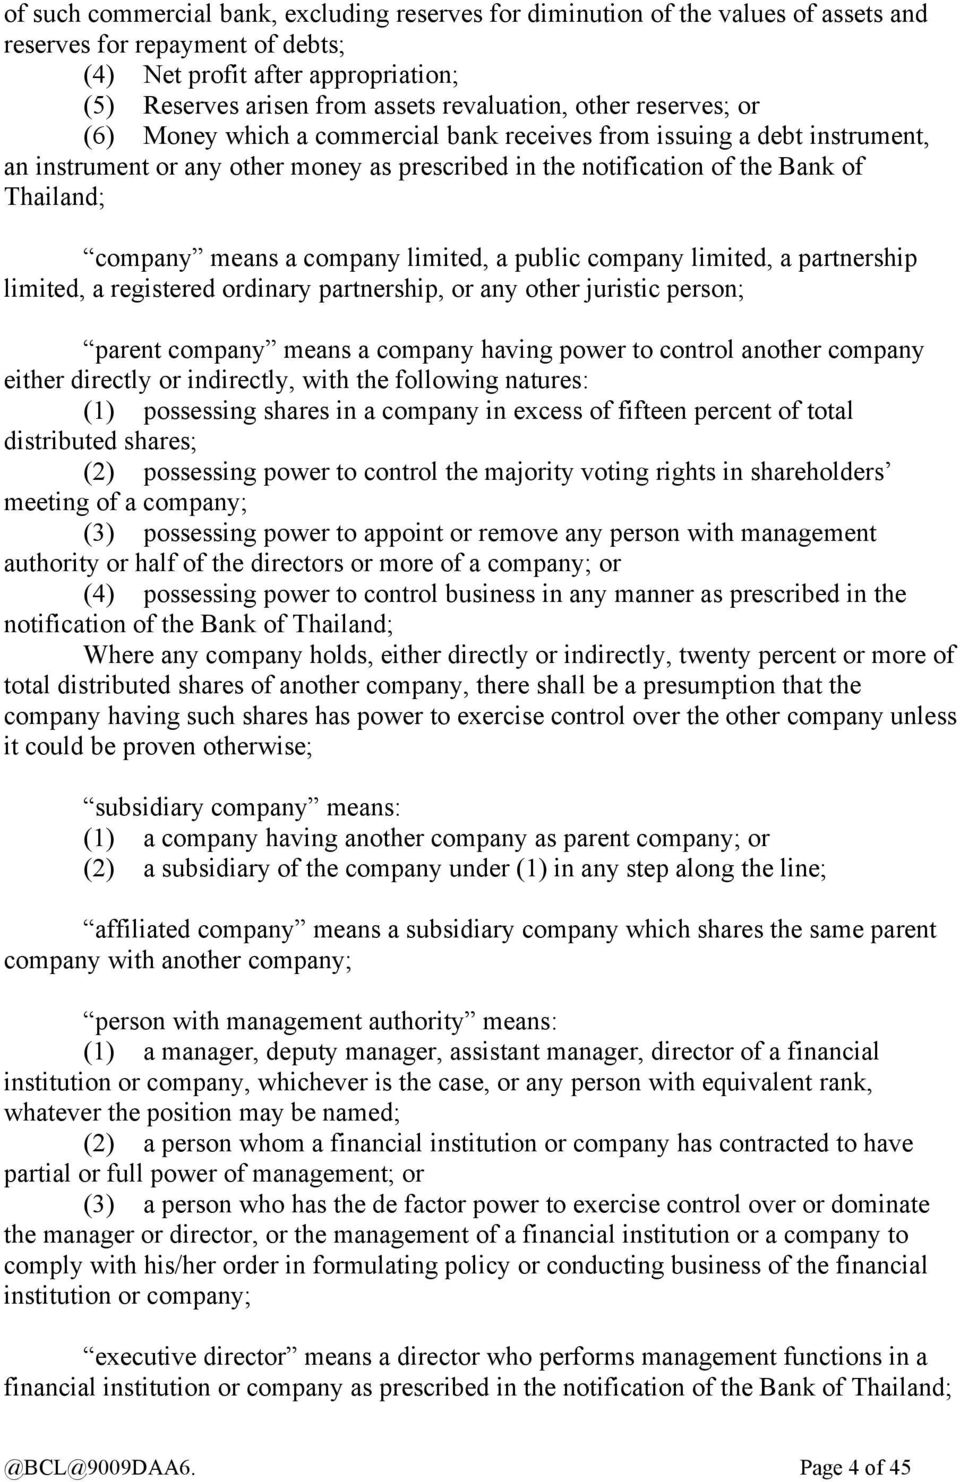 company means a company limited, a public company limited, a partnership limited, a registered ordinary partnership, or any other juristic person; parent company means a company having power to